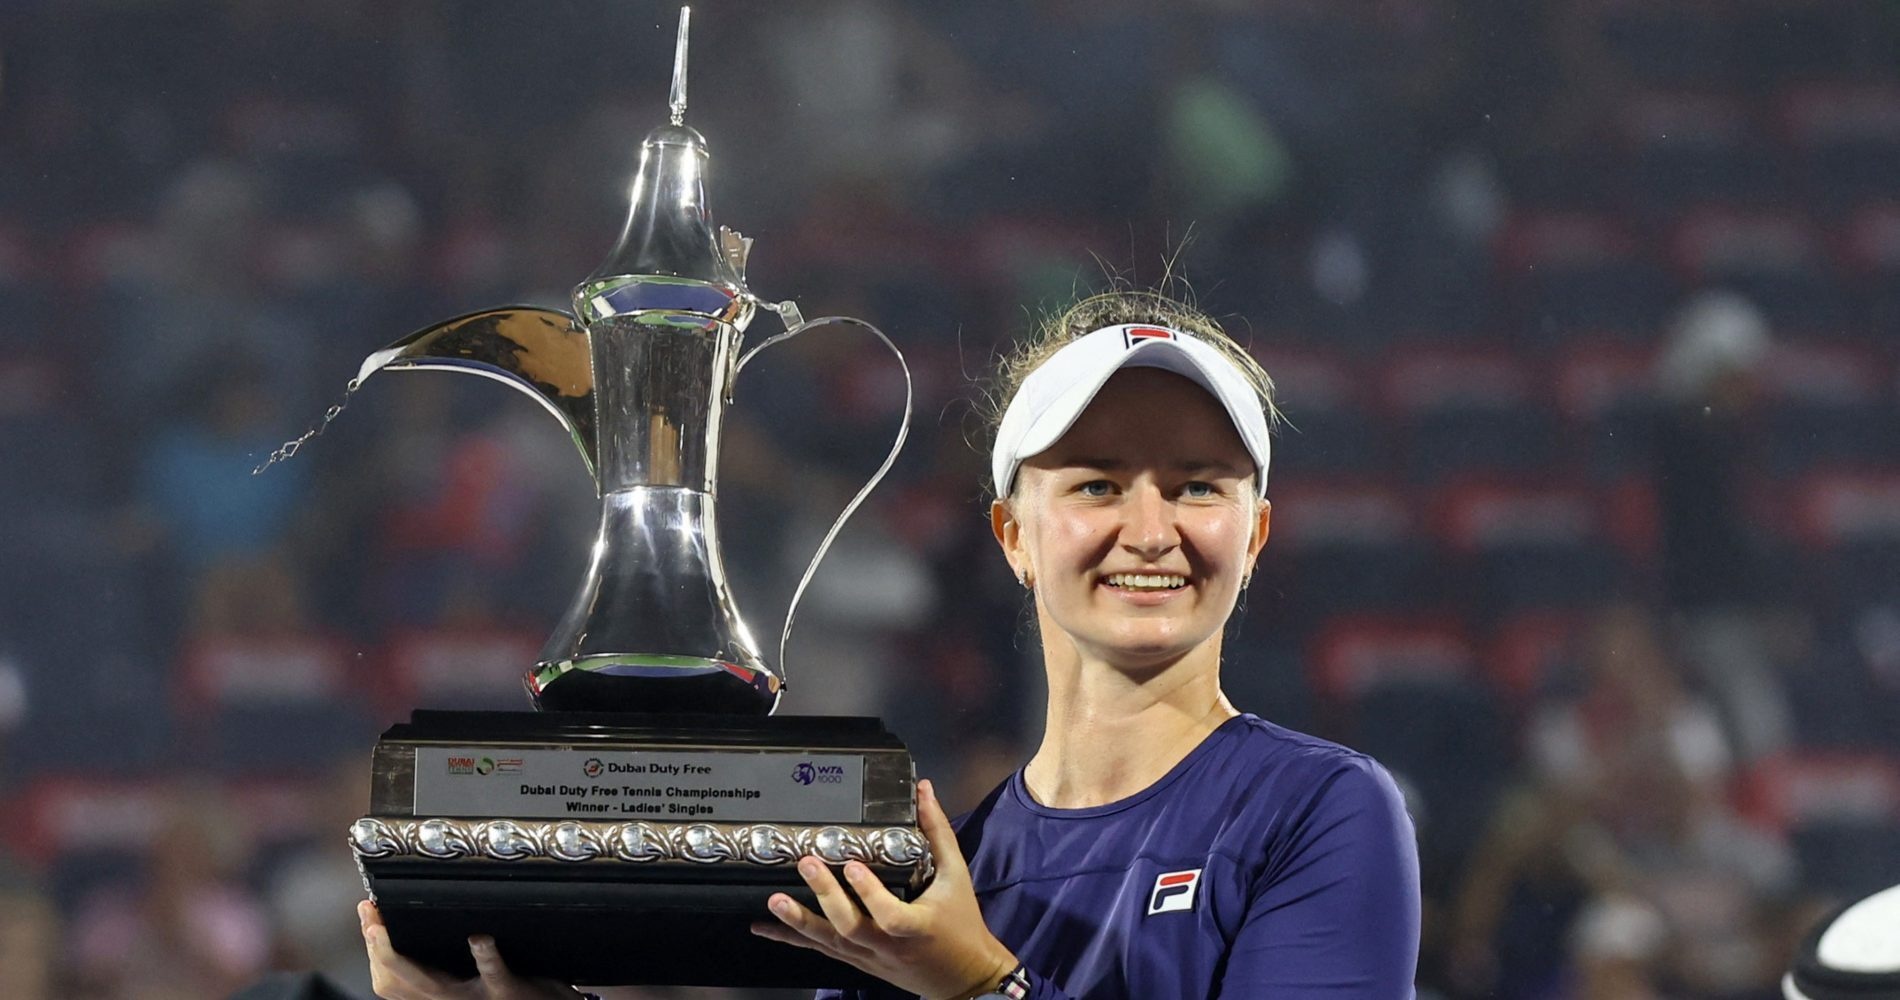 WTA Dubai Tennis Championships moved to March to precede ATP event